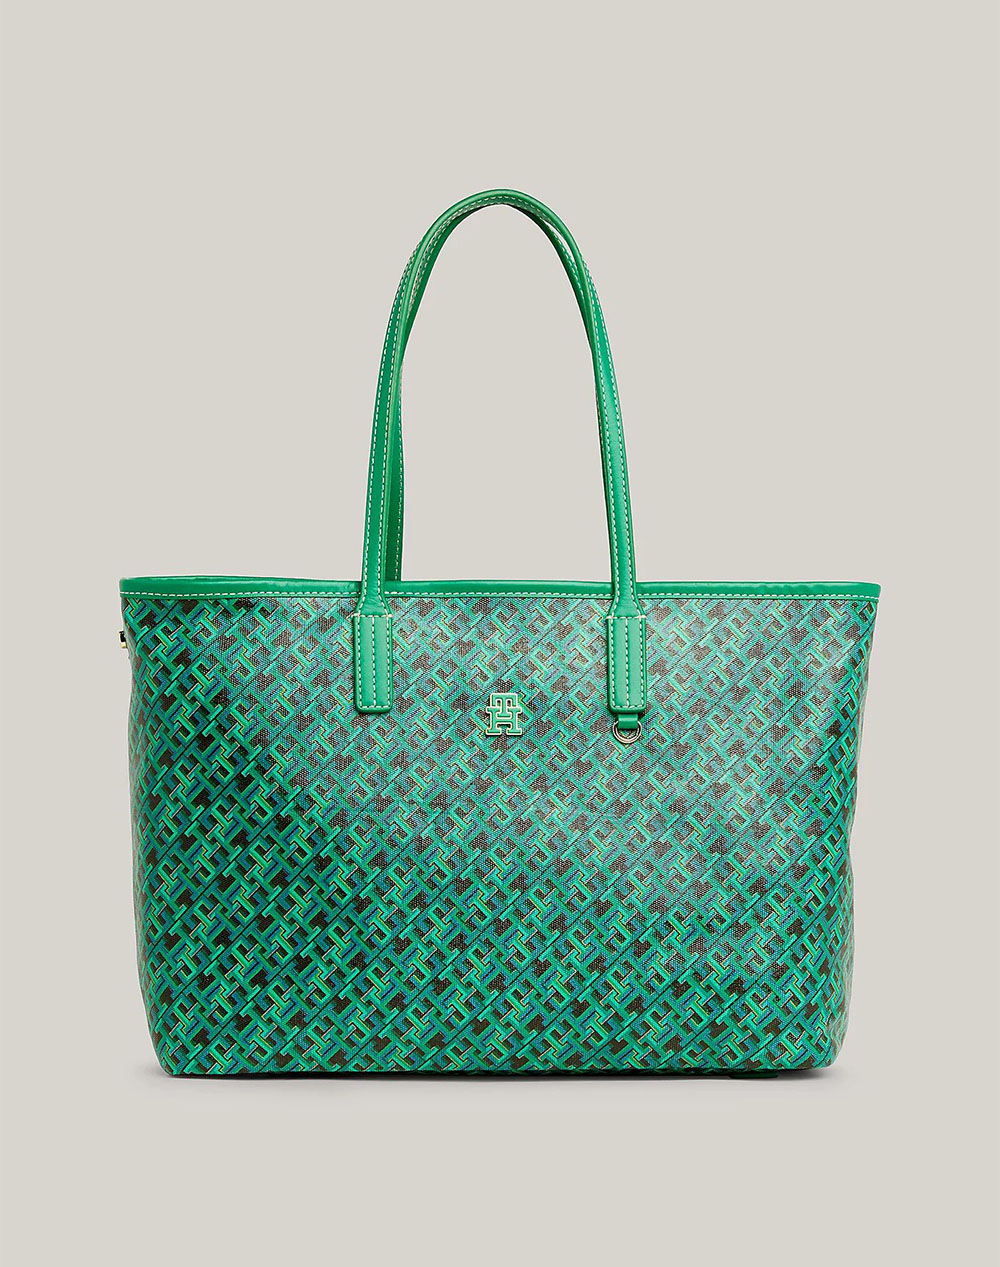 TOMMY HILFIGER TH MONOPLAY LEATHER TOTE MONO (Διαστάσεις: 51 x 15.5 x 28 εκ) AW0AW15971-L4B Green